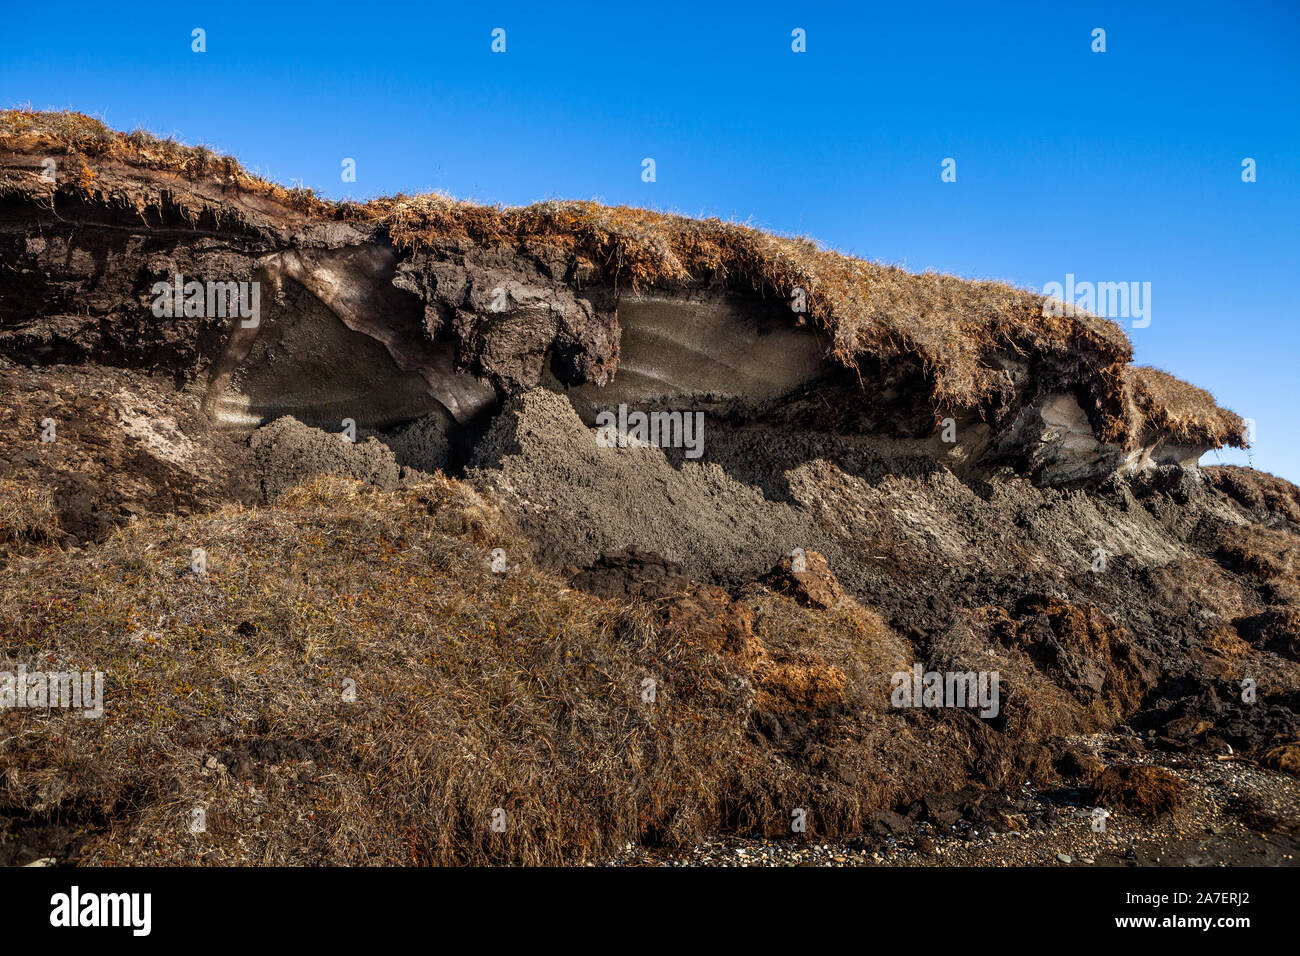 Exposed arctic permafrost at the edge of tundra cliffside as it erodes into Kotzebue Sound, in the Alaskan Arctic. Stock Photo